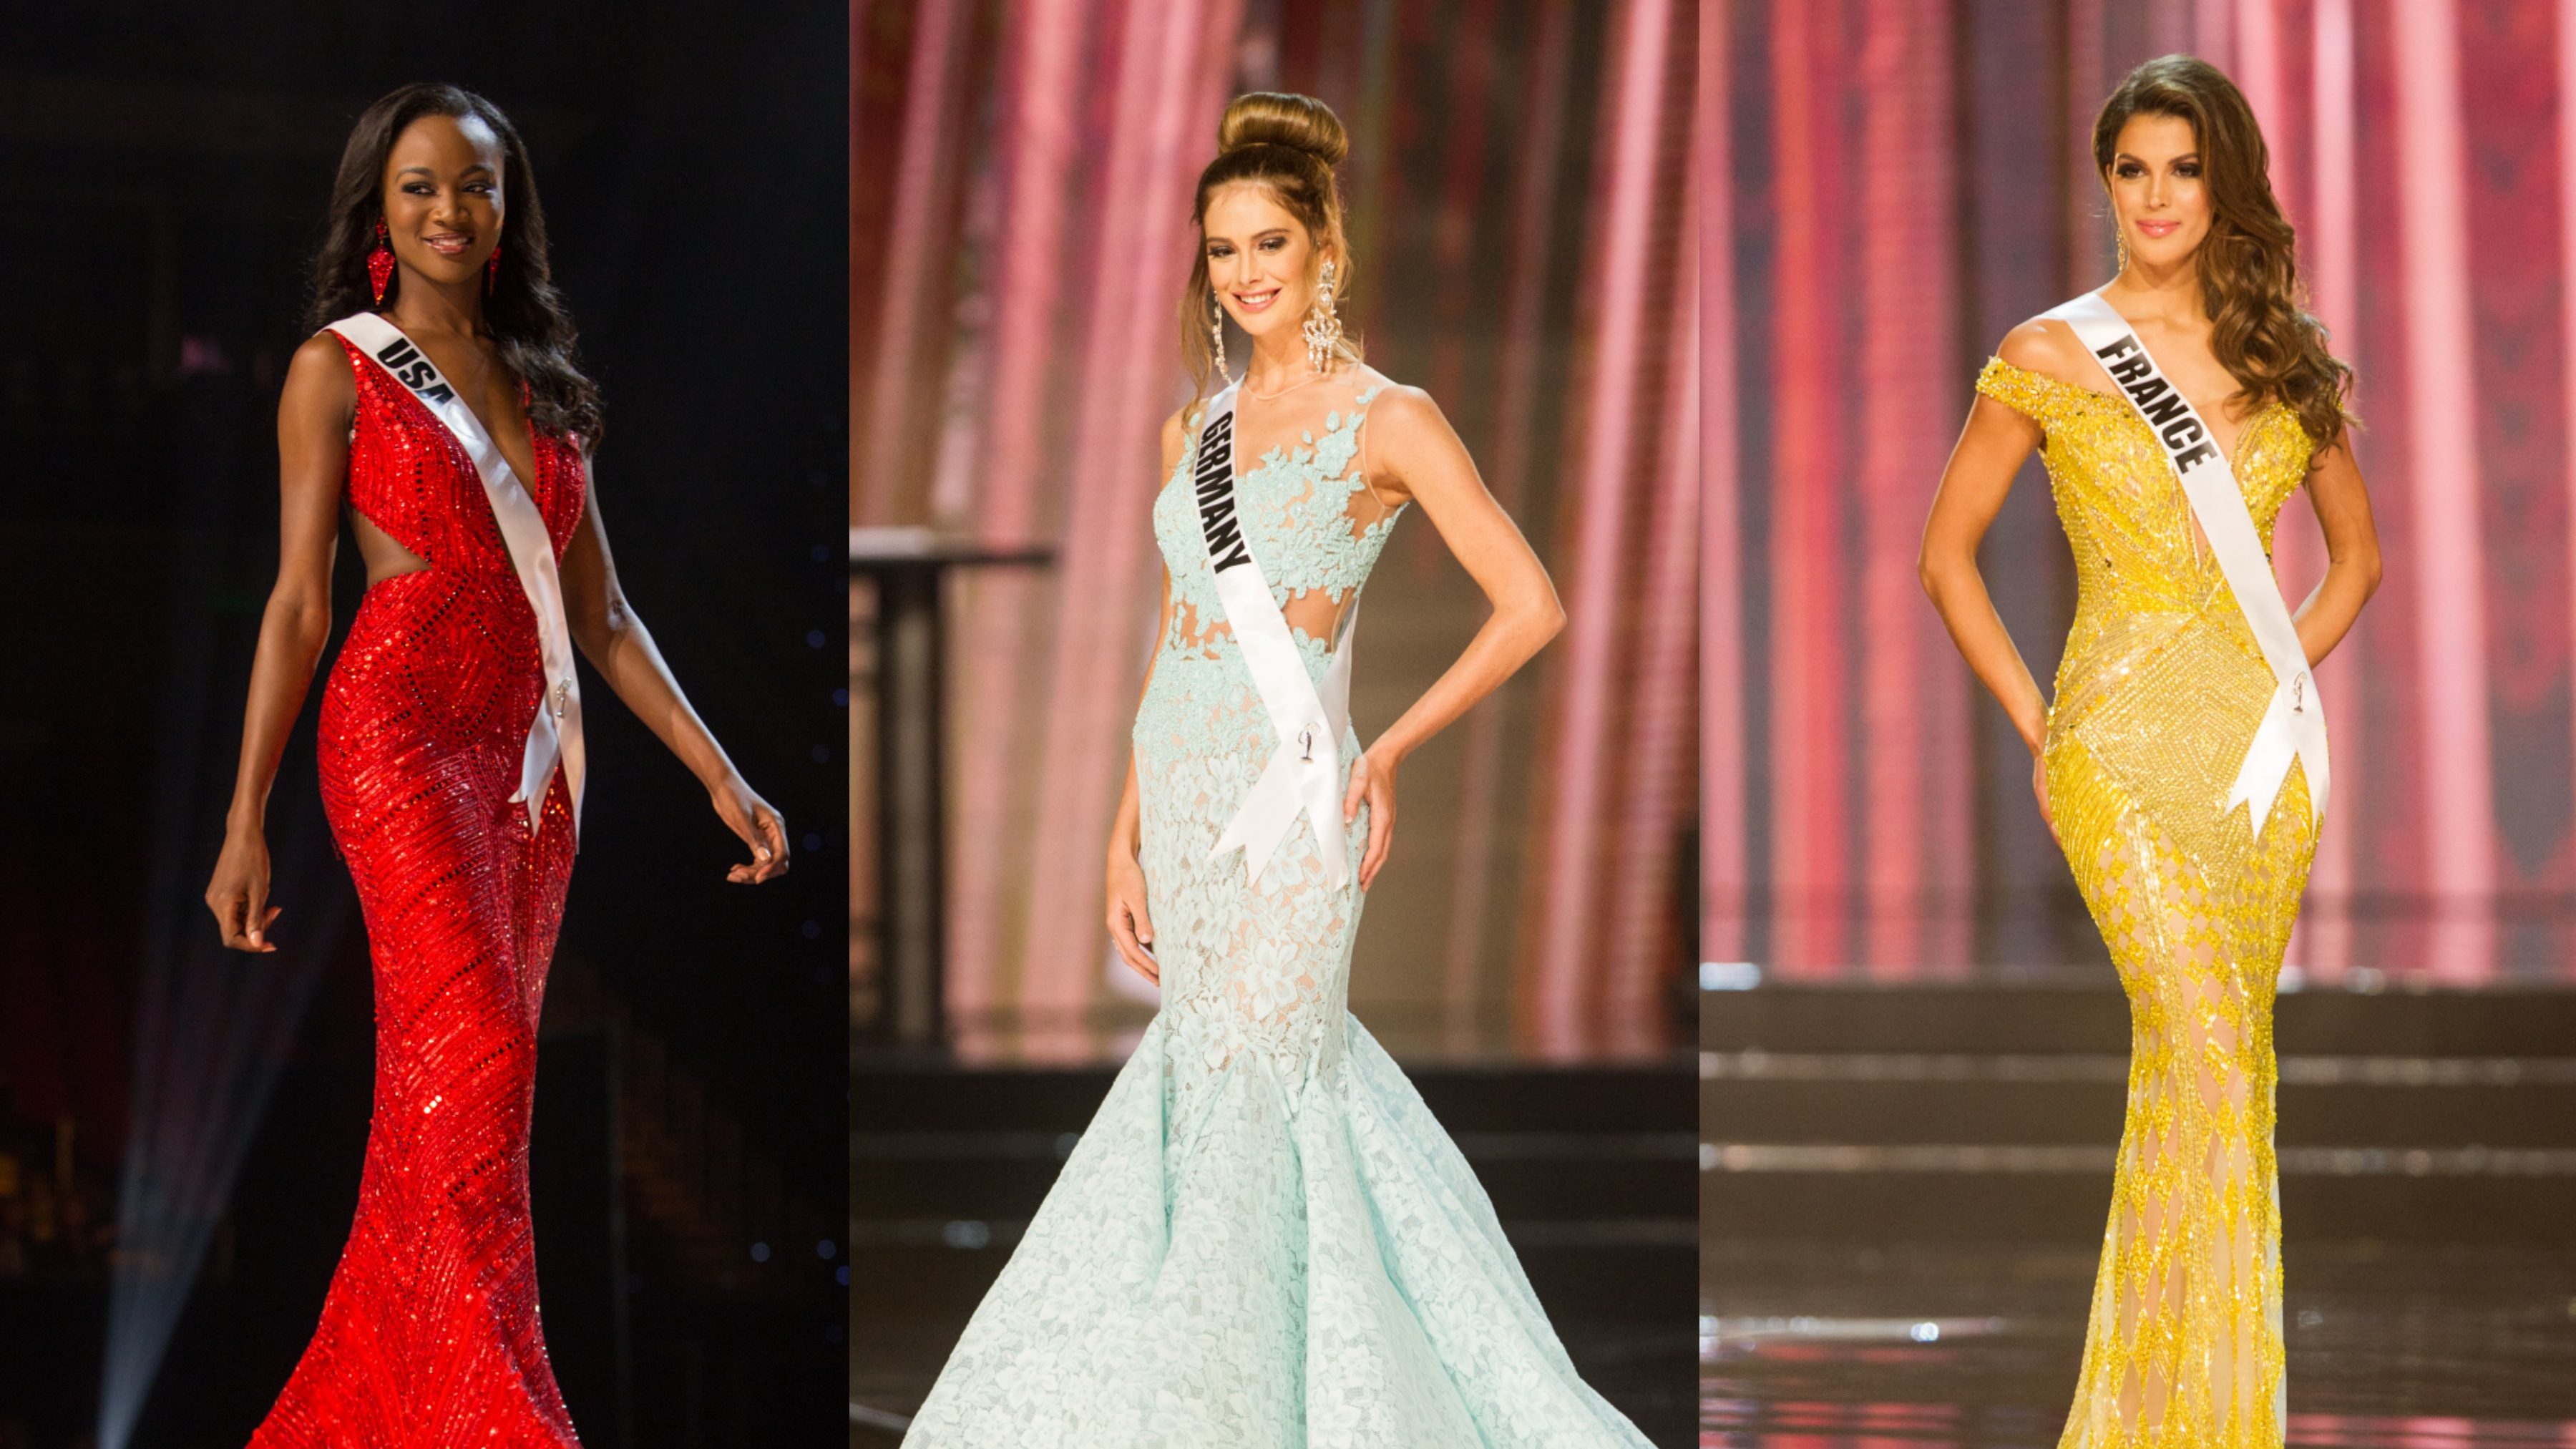 Photos from HO/Miss Universe Organization  